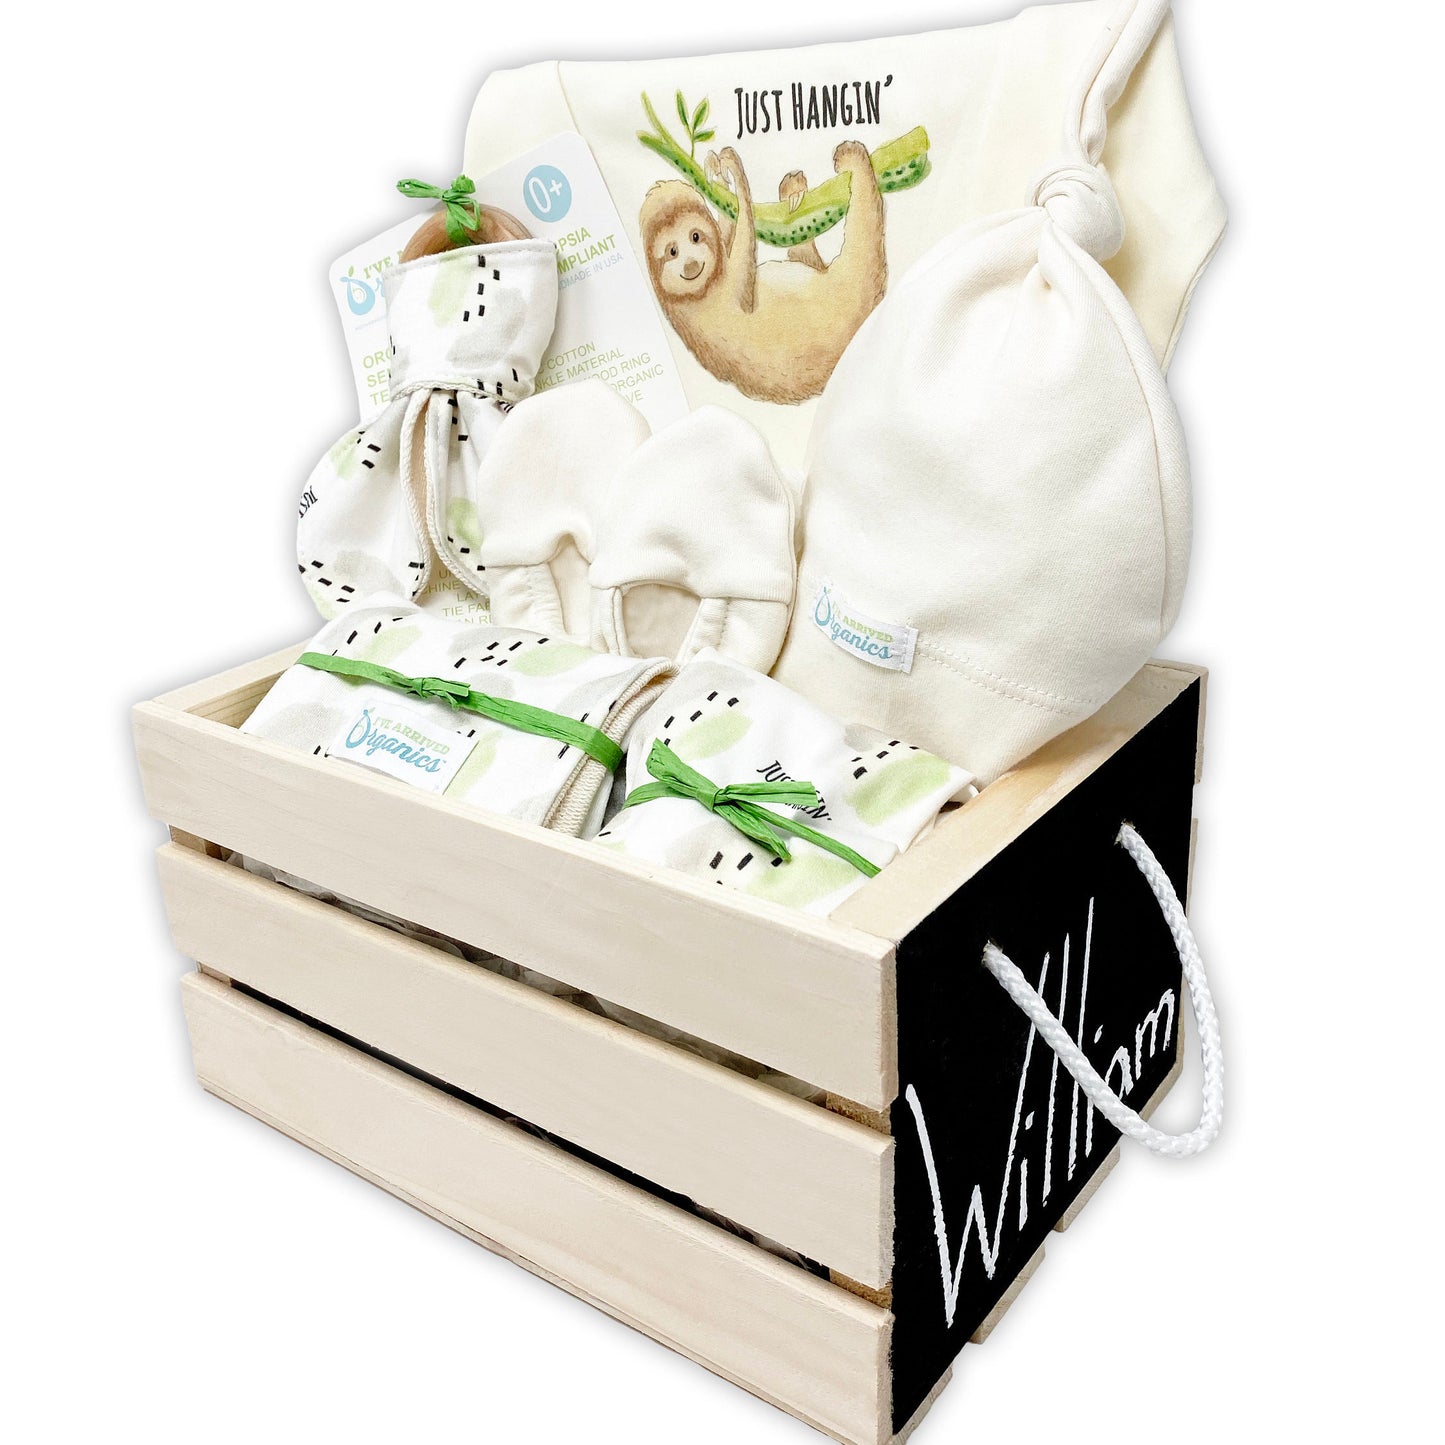 Personalized Sloth Gender Neutral Baby Gift Basket